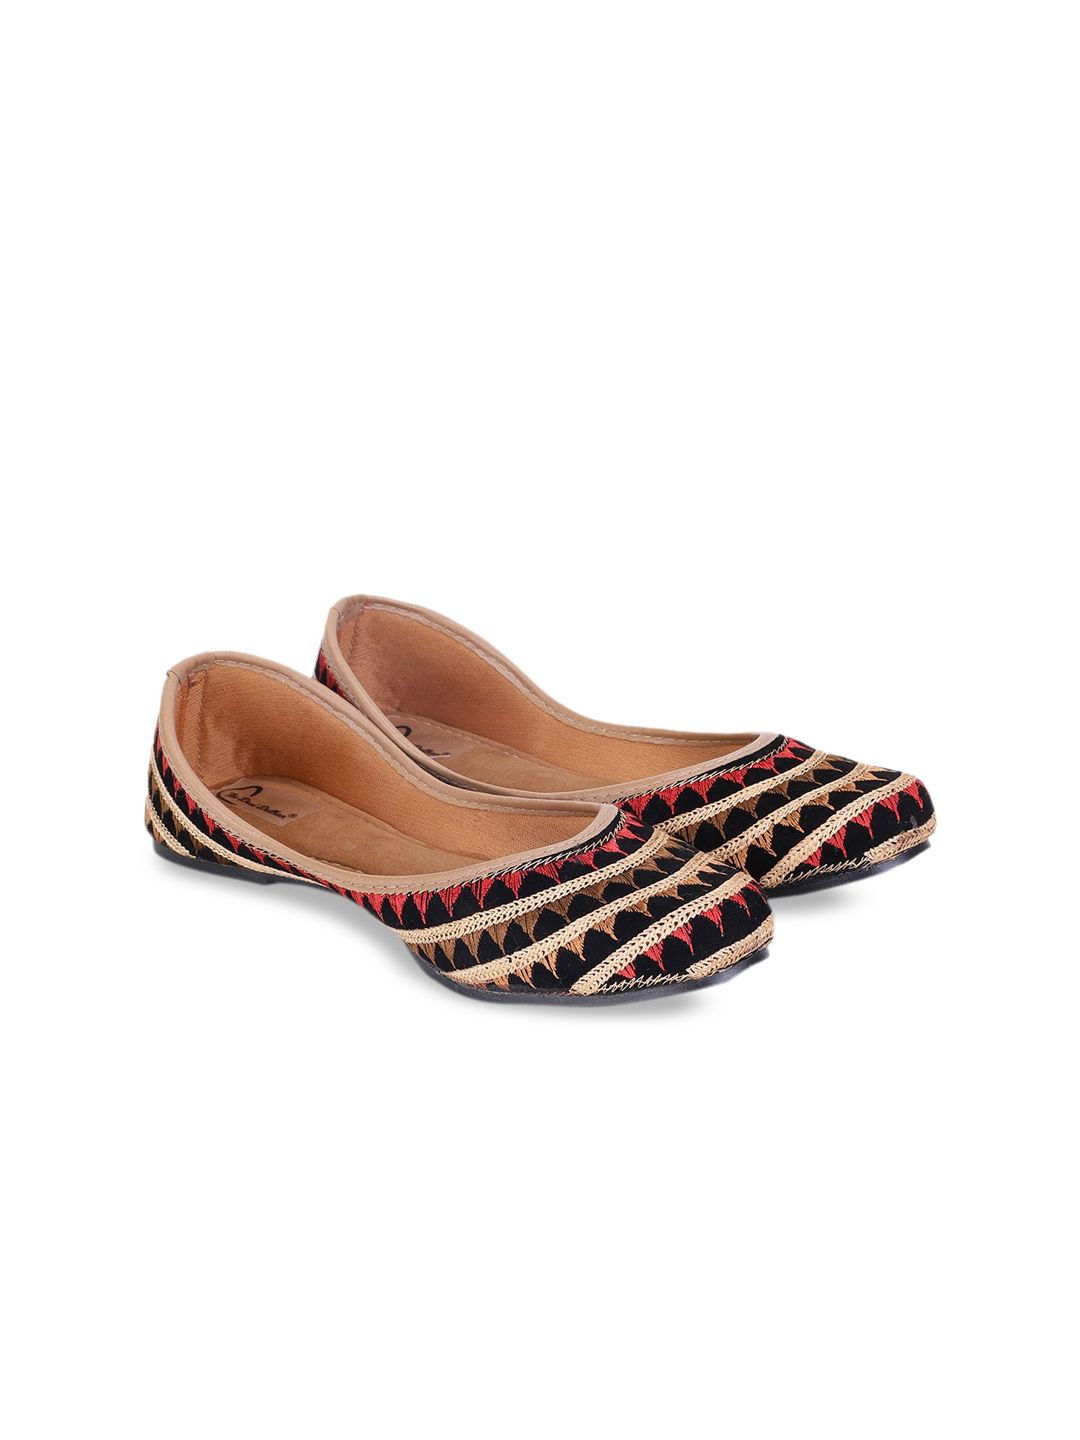 The Desi Dulhan Women Multicoloured Embellished Leather Ethnic Flats Price in India